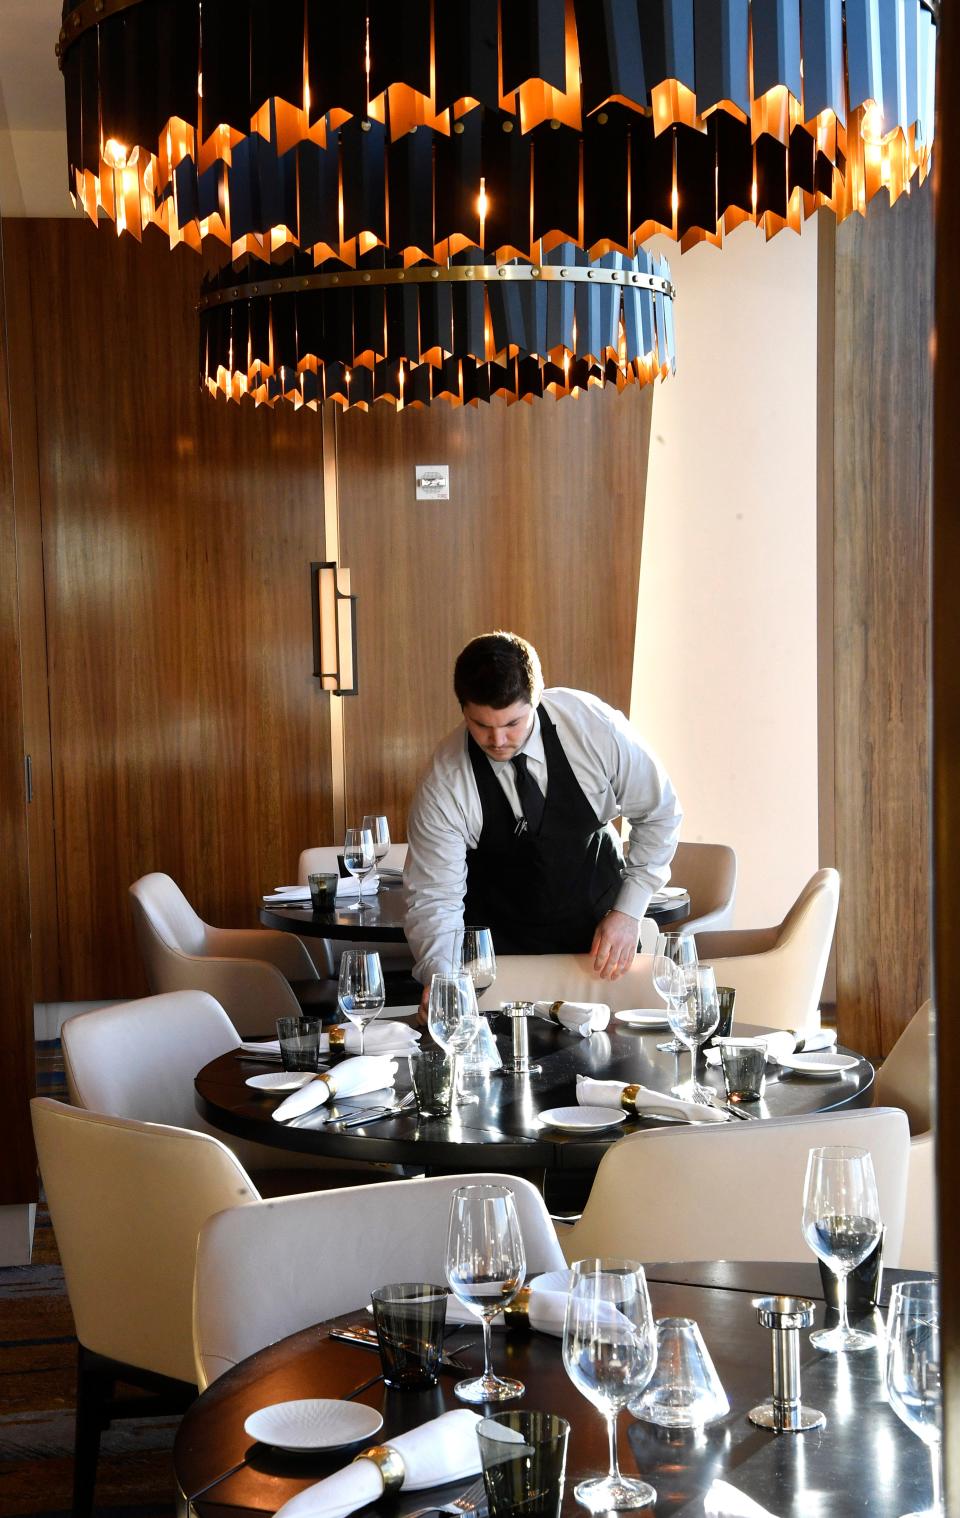 A waiter prepares for the night's guests inside Bourbon Steak on the 34th floor of the JW Marriott hotel.